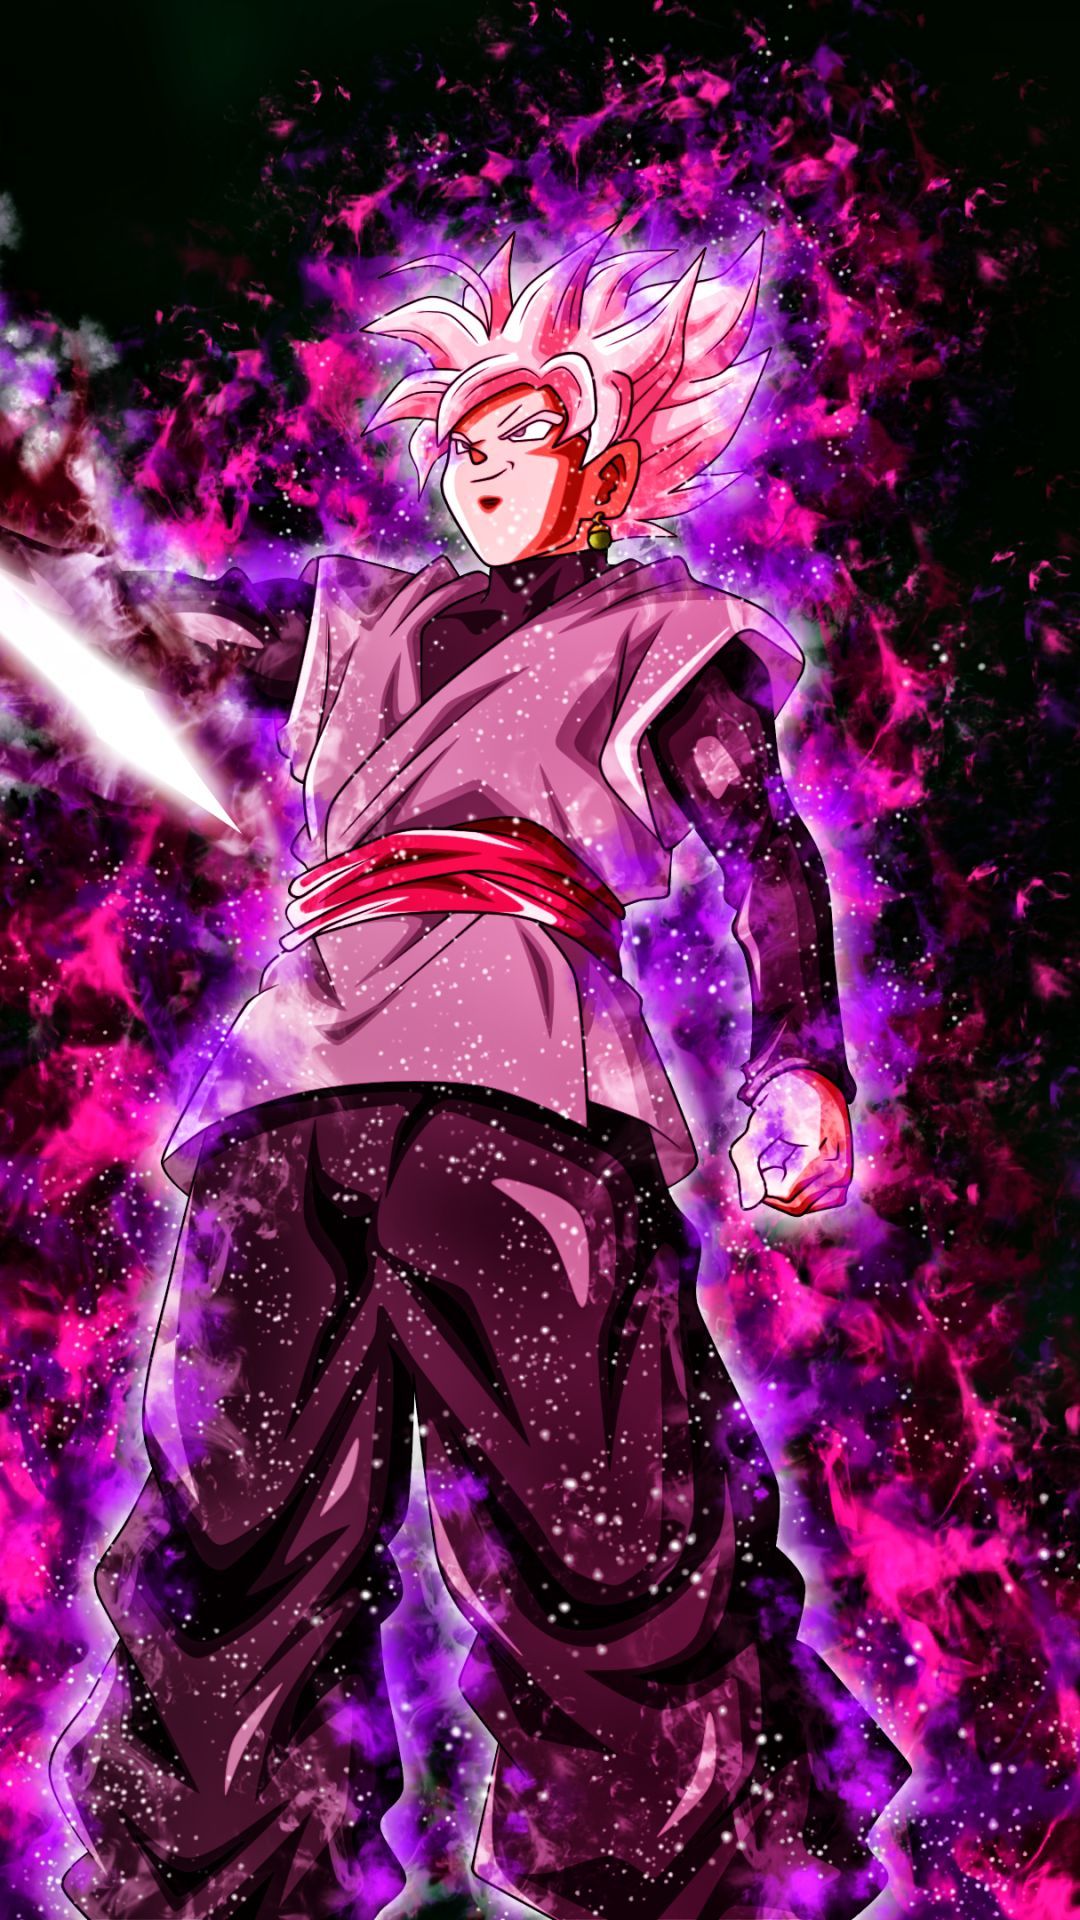 Goku Black Wallpaper for iPhone with high-resolution 1080x1920 pixel. You can use this wallpaper for your iPhone 5, 6, 7, 8, X, XS, XR backgrounds, Mobile Screensaver, or iPad Lock Screen - Goku